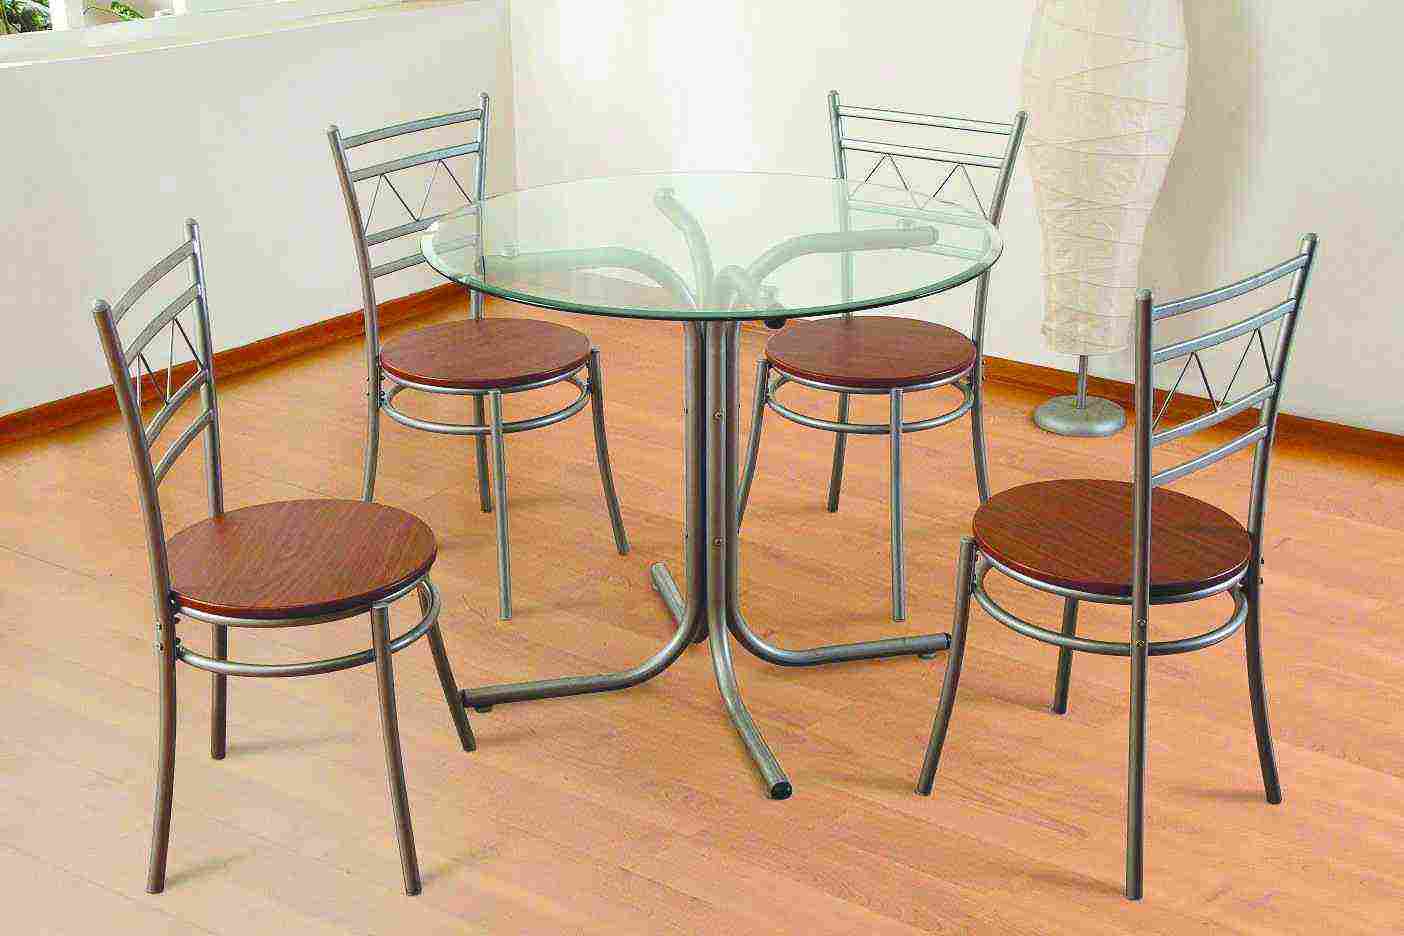 Affordable Dining Room Chairs - Decor Ideas